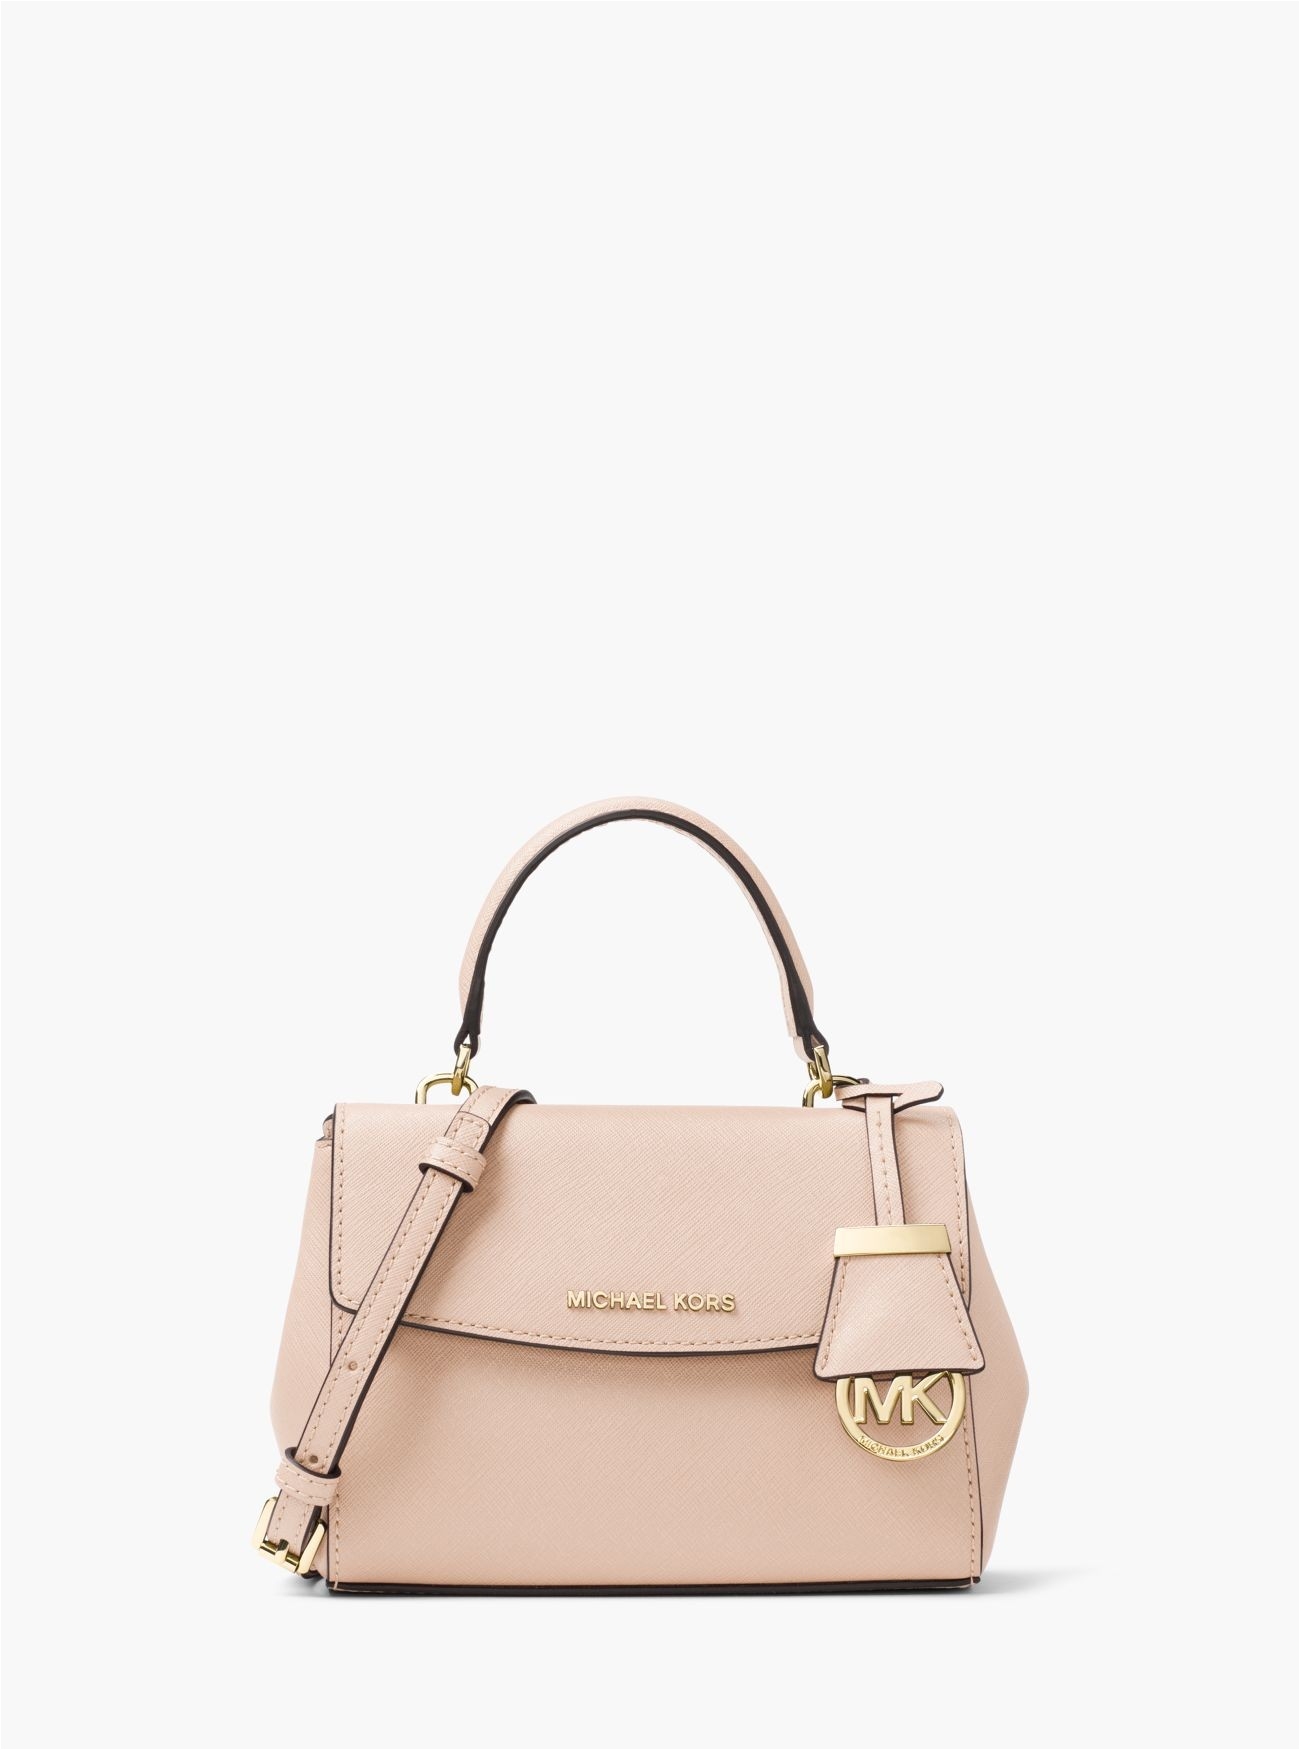 sale michael kors soft pink ava extra small saffiano leather crossbody discount online